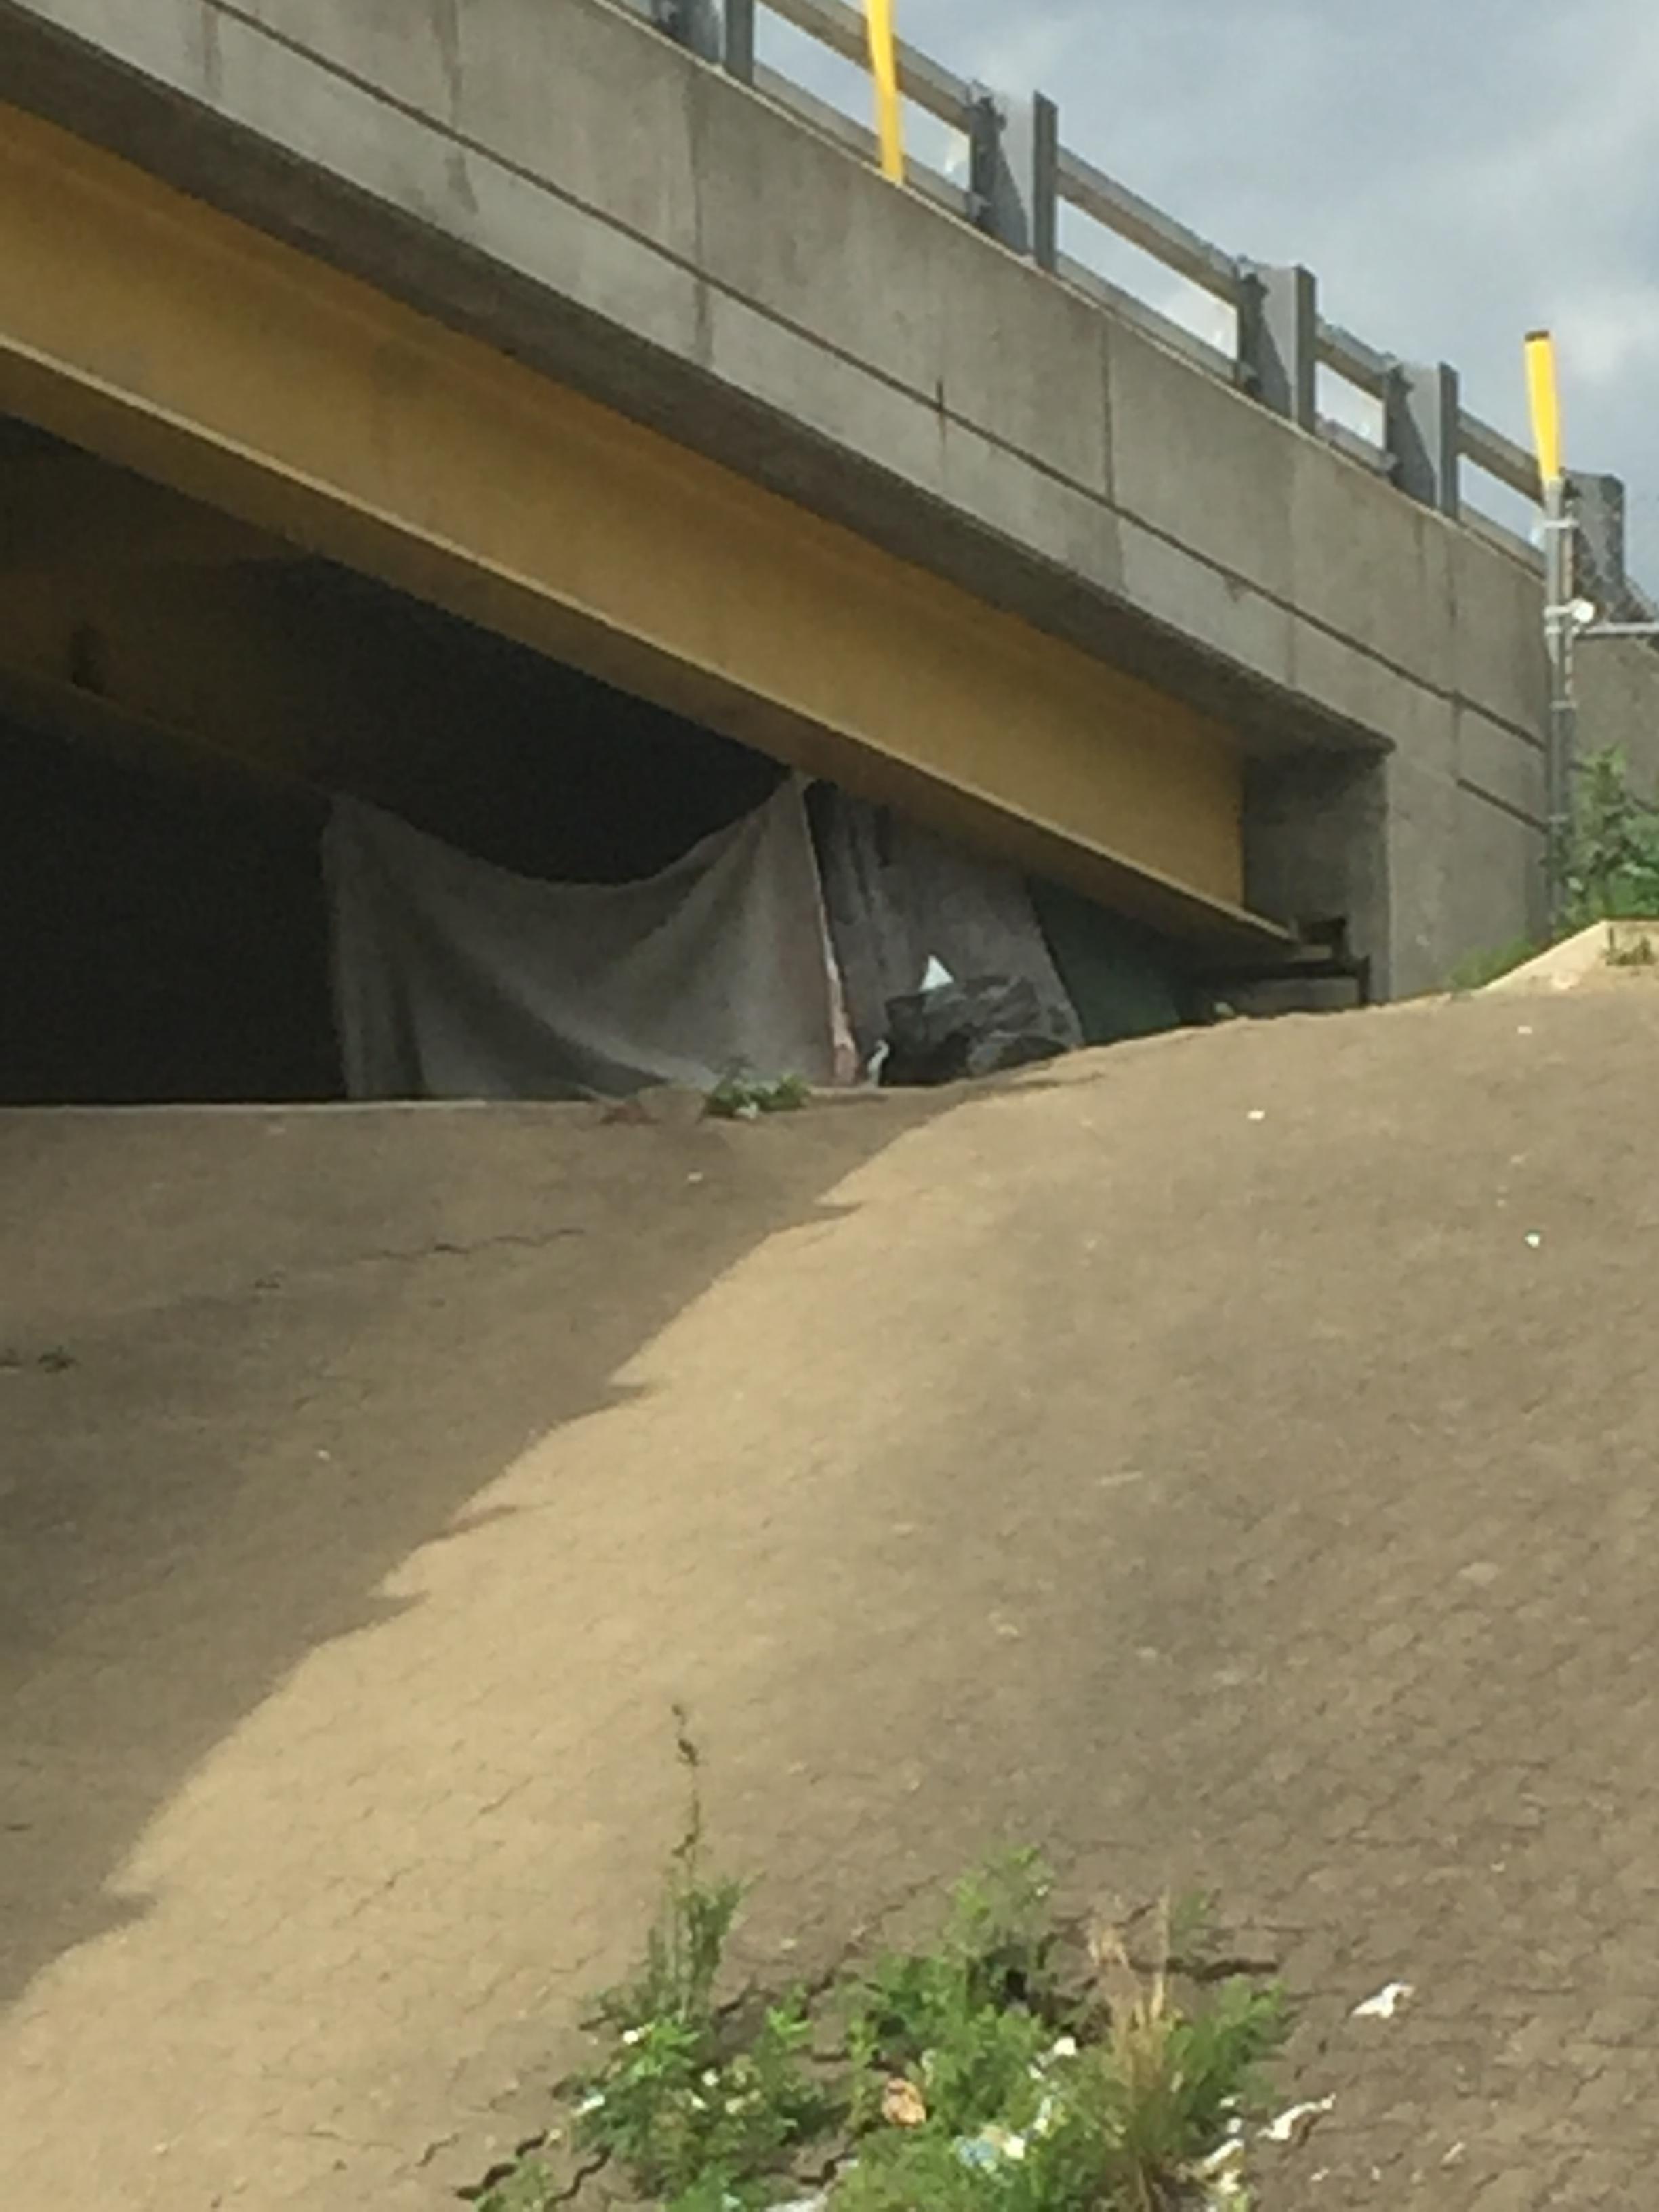 This is a photo of a homeless person camping under a Pittsburgh bridge.